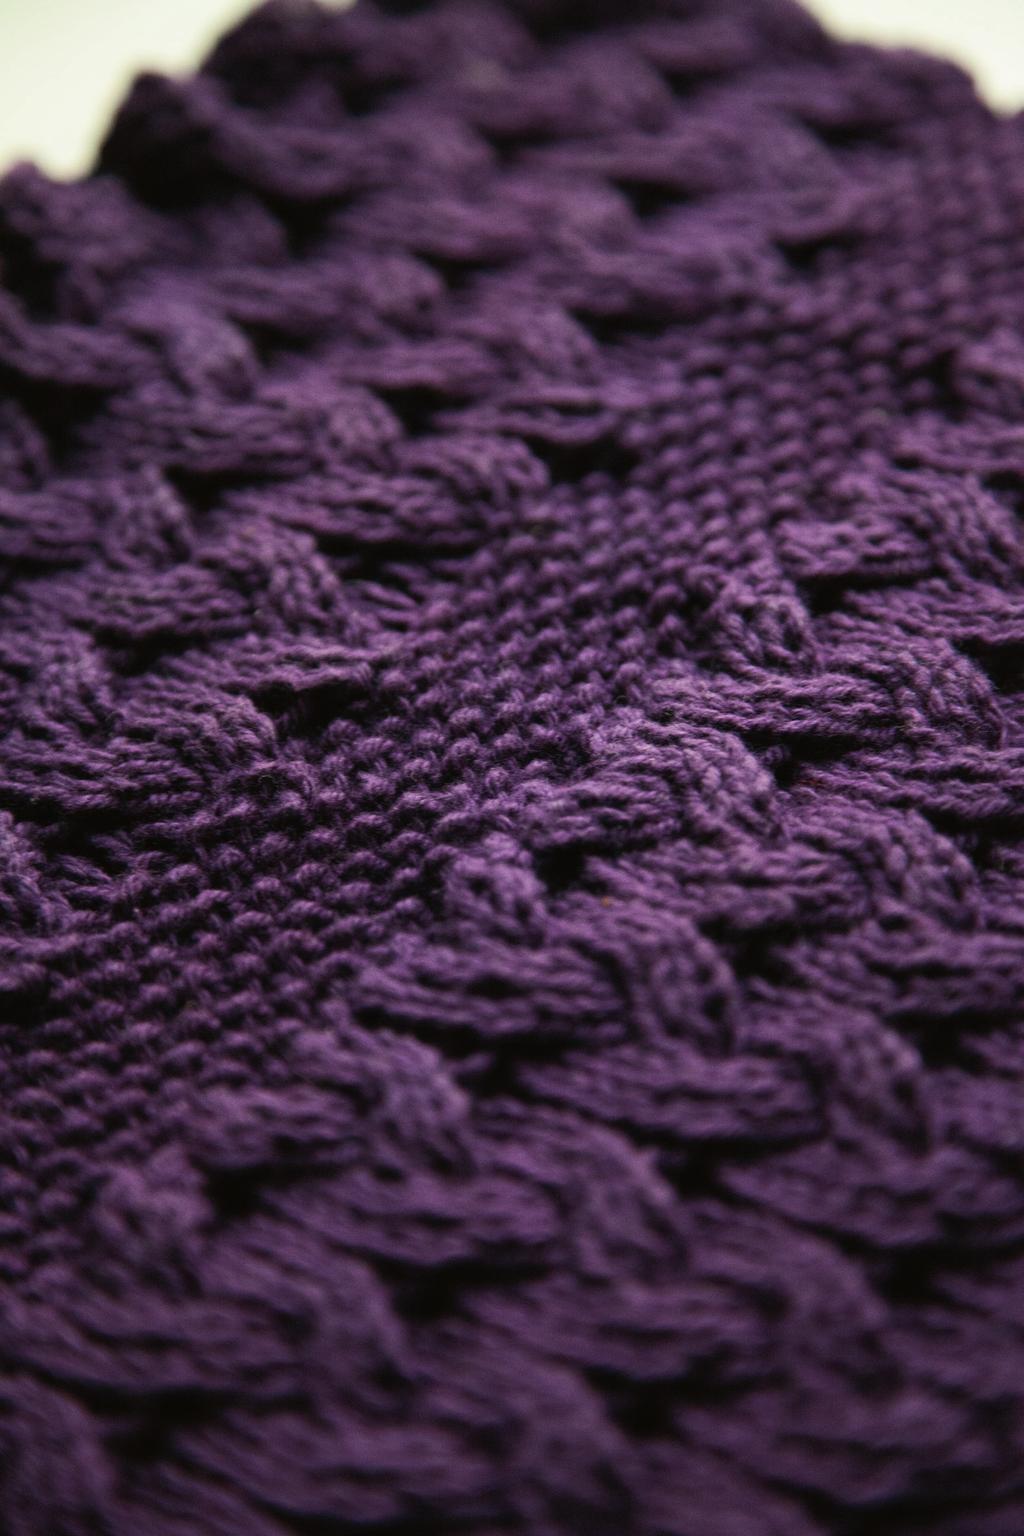 Hand Towel Finished Measurements Notions Approx 15 x 21, blocked Cable Needle Yarn Gauge Knit Picks Dishie (100% Cotton; 190 yards/100g): Eggplant 27039, 3 balls 36 sts